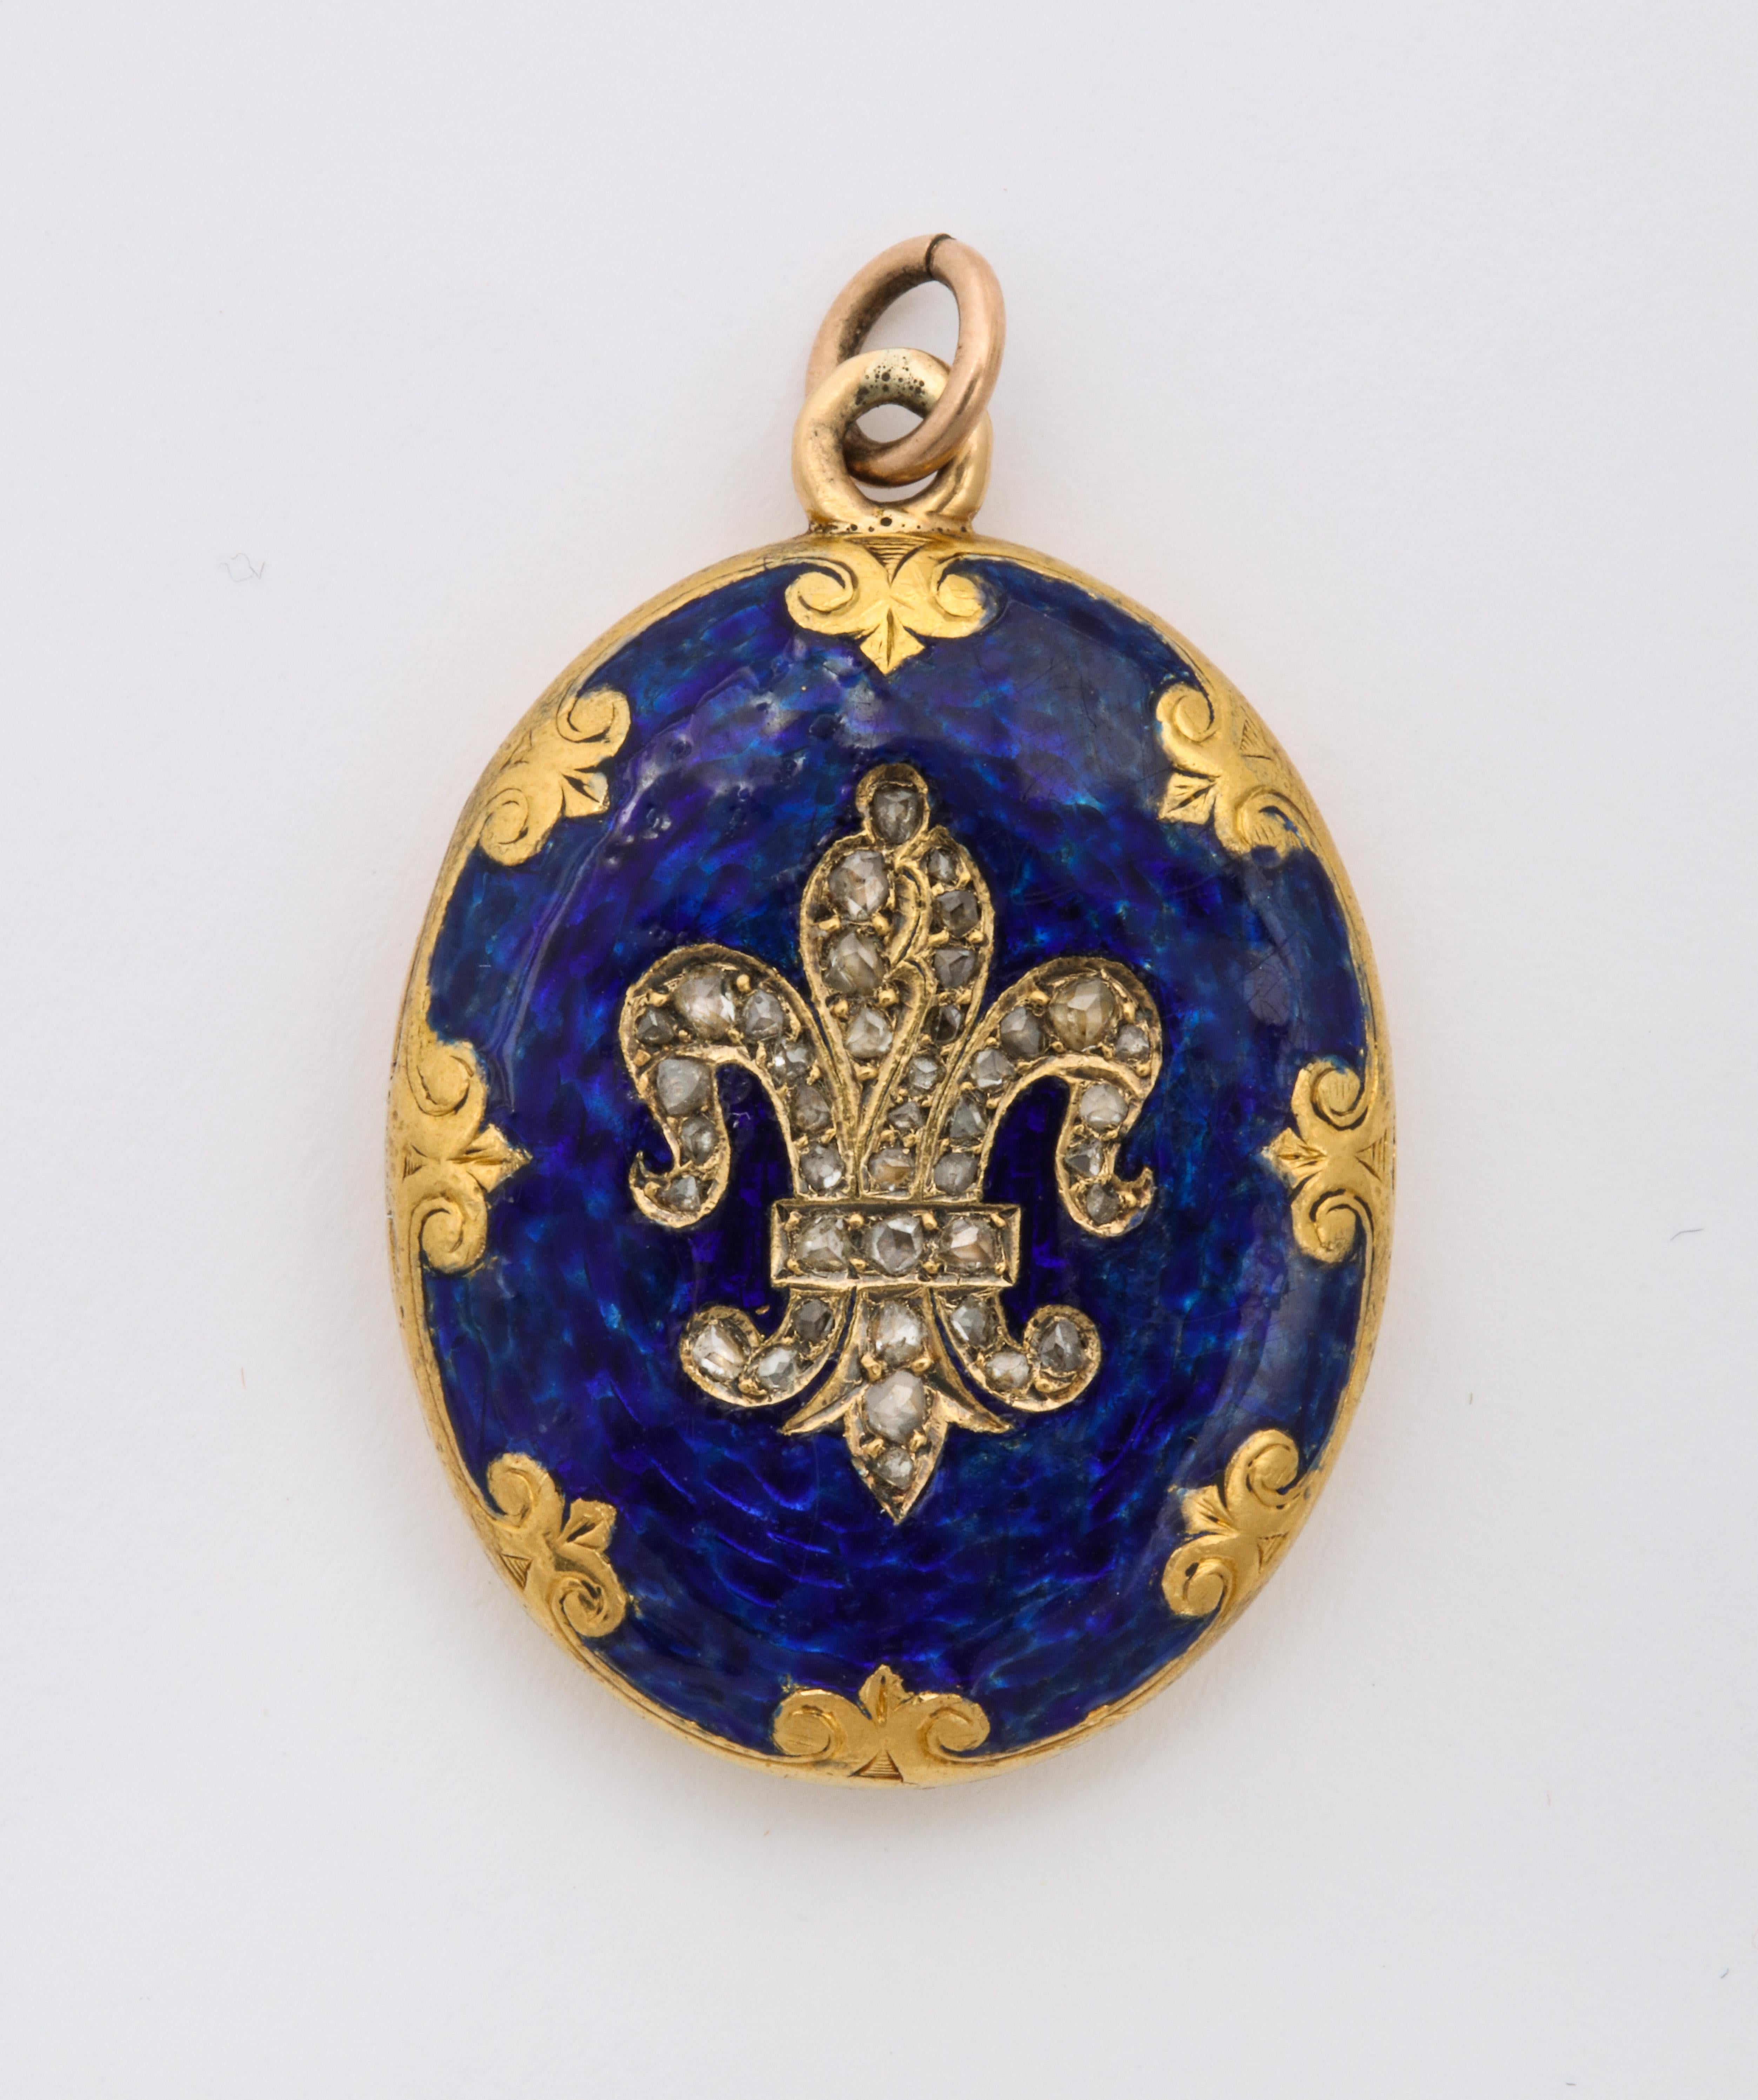 The color of delicious opaque blue enamel showcases an 18 Kt gold fleur de lis sparkling with antique cut diamonds The regal colored pendant is made more so by the rich gold crowns that define the border around the circumference. The color and